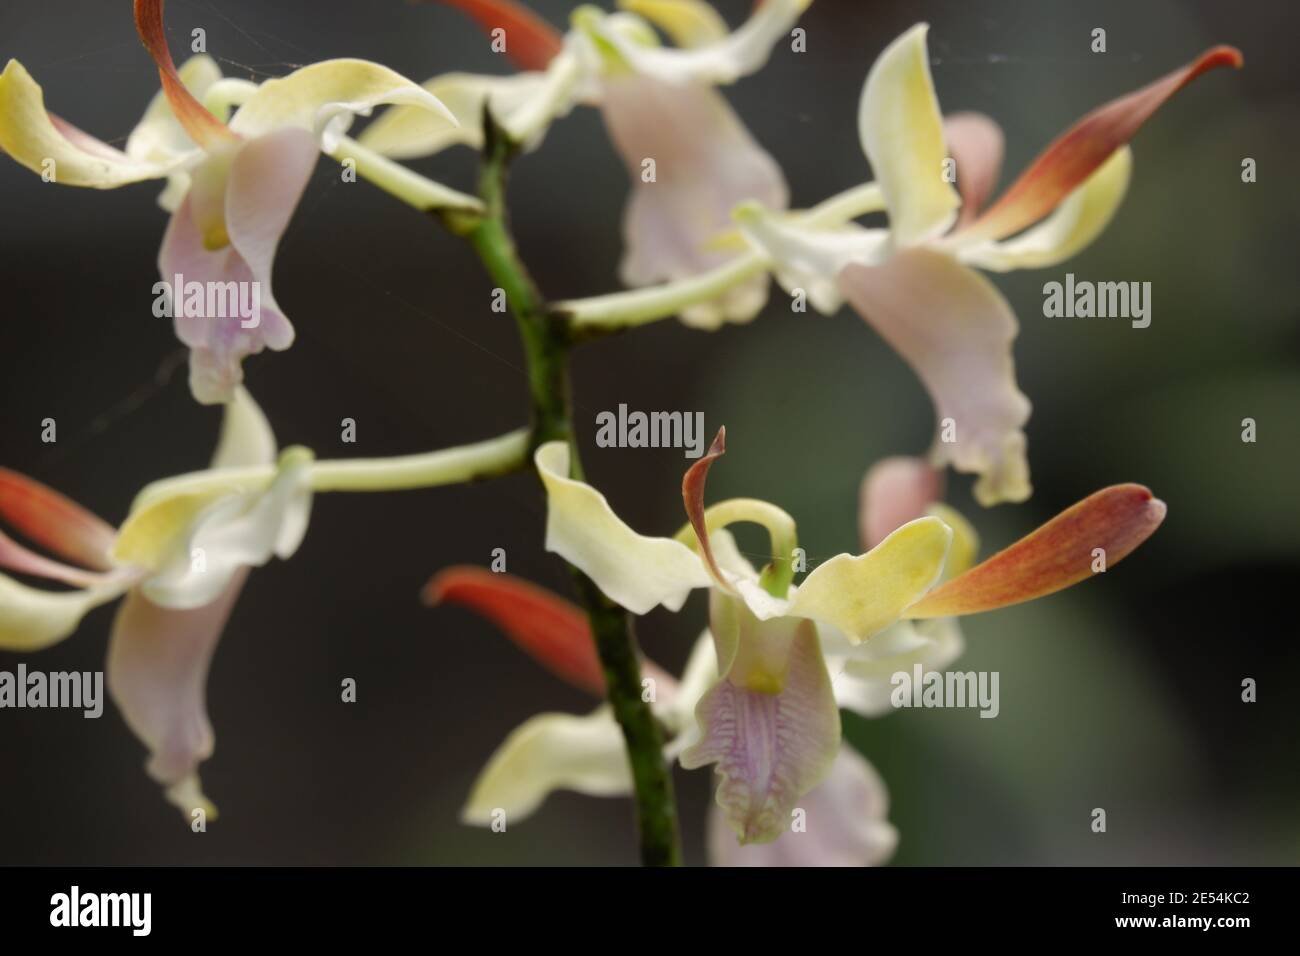 selective focus close up image of soft pink curly dendrobium orchid flowers full bloom in the garden isolated blur background Stock Photo